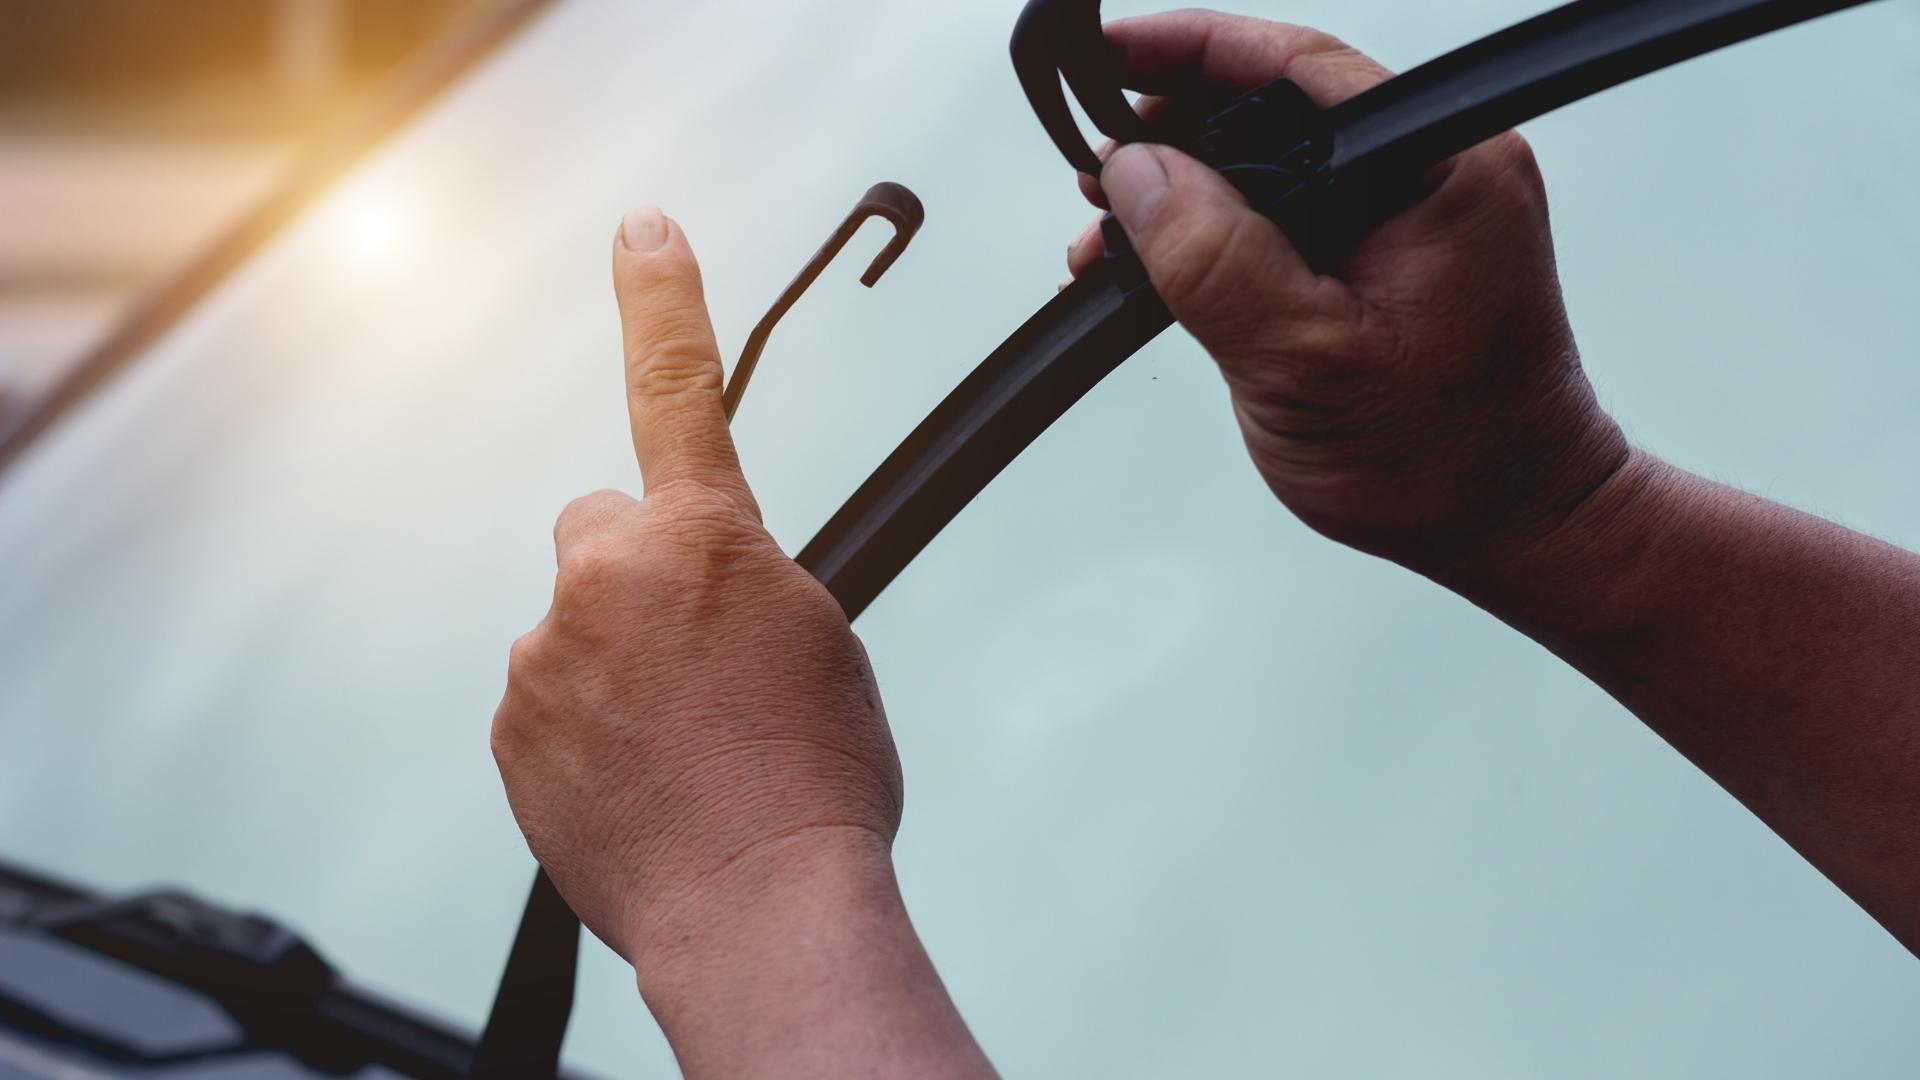 Person in replacing wiper blade on a vehicle